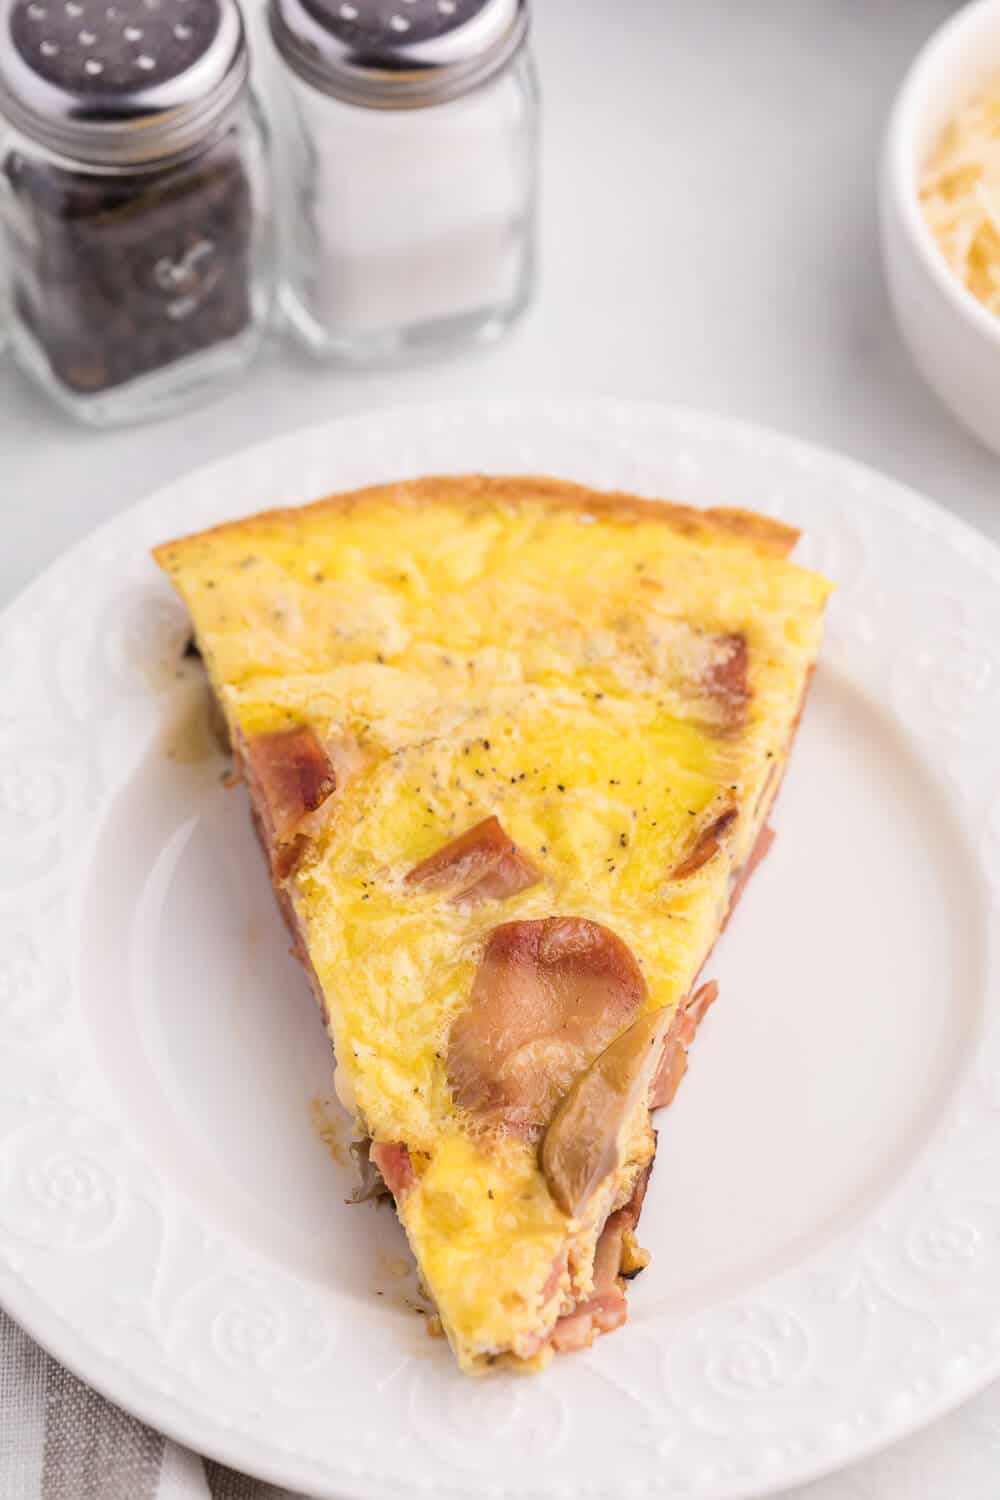 Turkey Bacon Frittata - Cut a few calories on this amazing brunch dish! Swap the pork for turkey in this delicious egg dish that's perfect for breakfast or dinner.